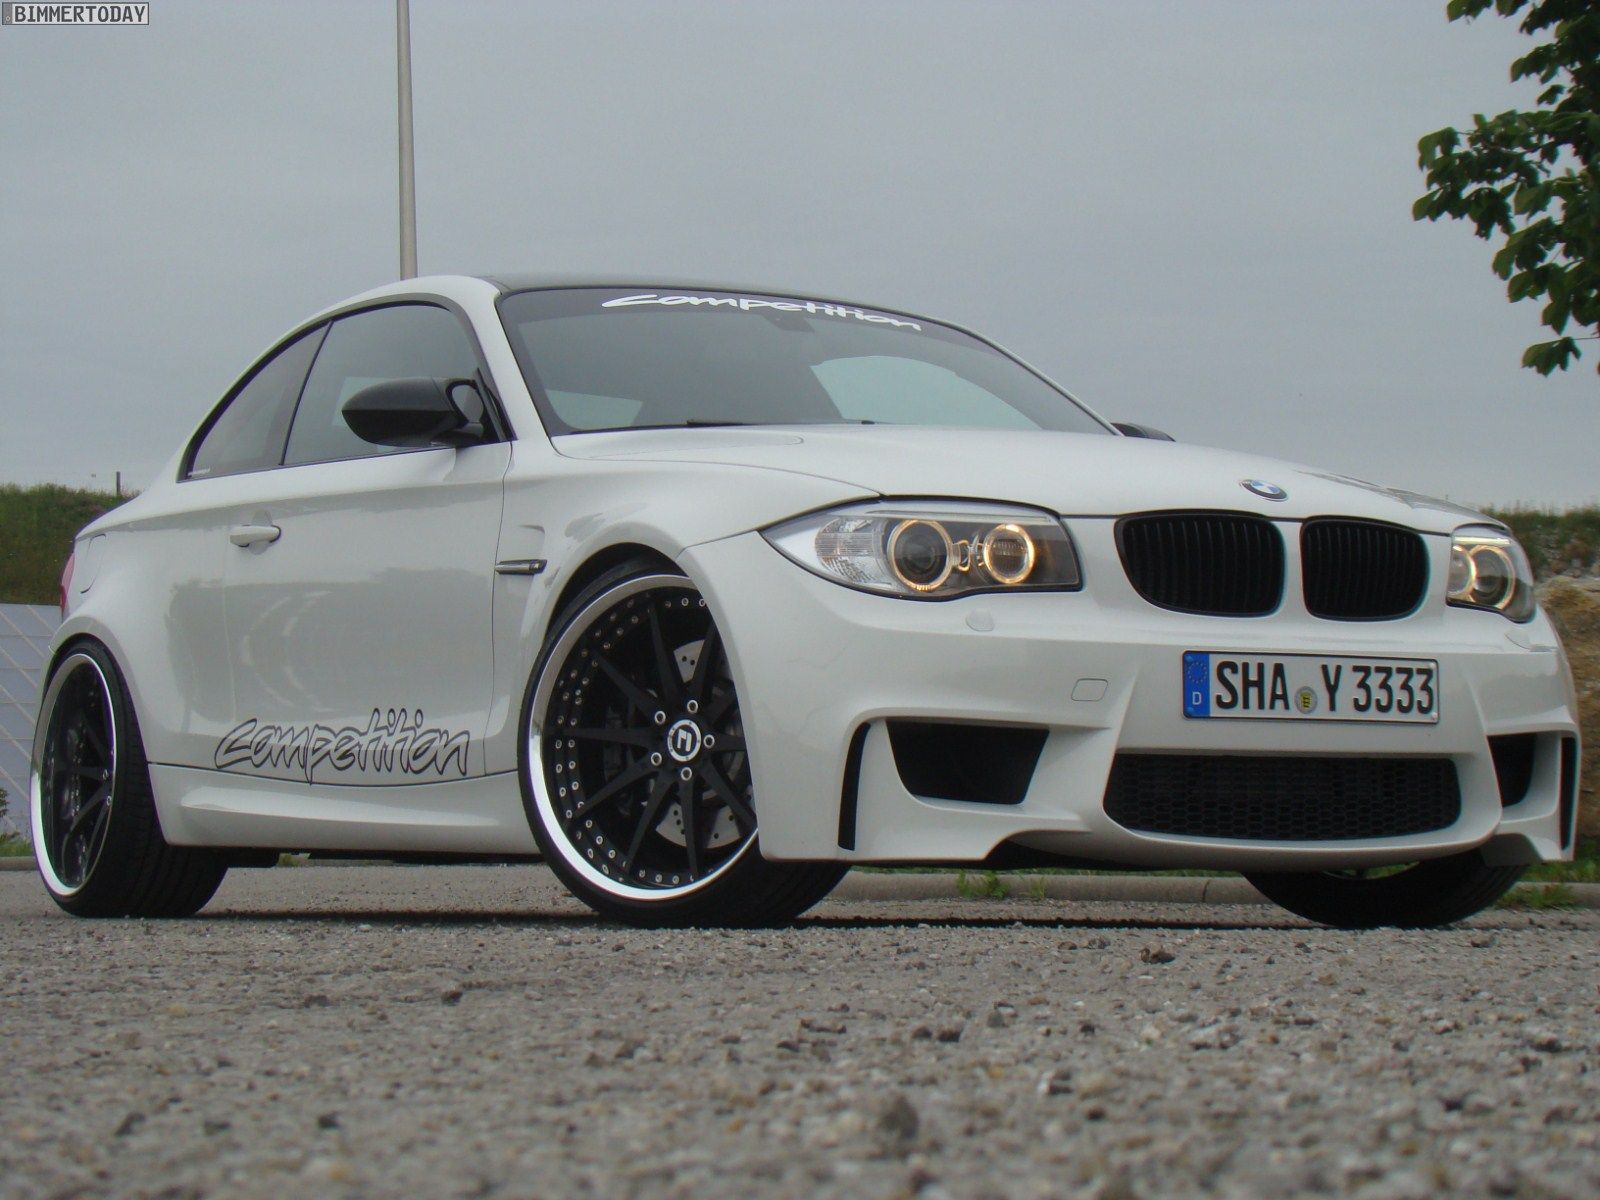 2012 BMW 1-Series M Coupe by TVW Car Design